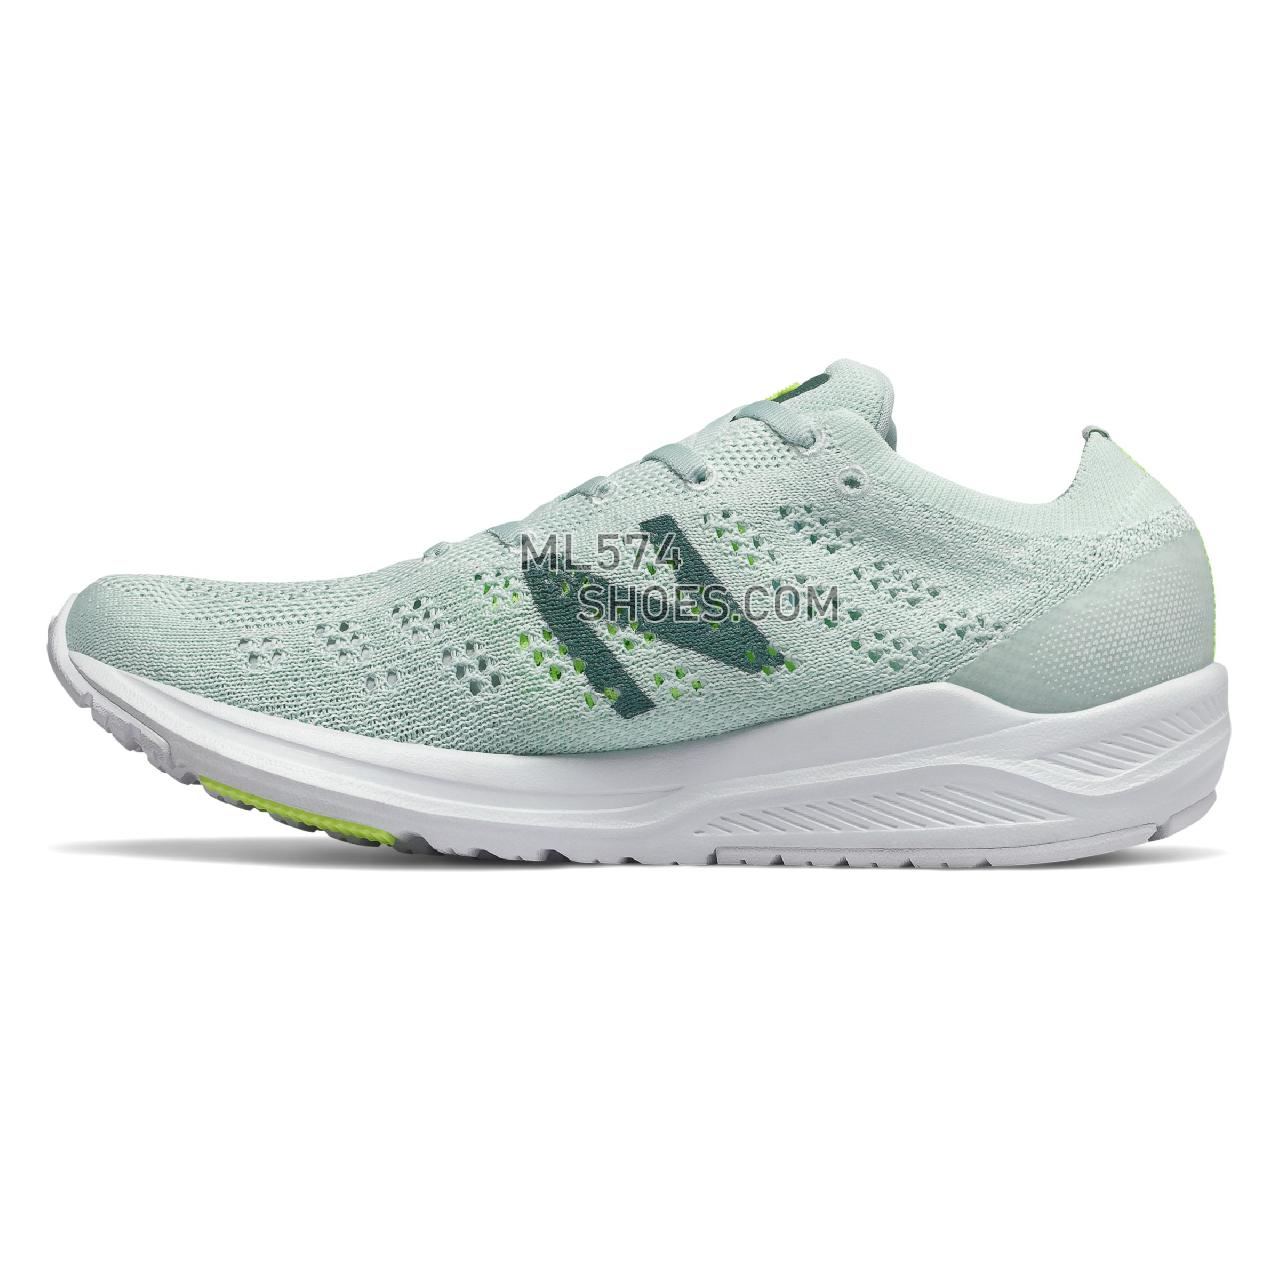 New Balance 890v7 - Women's Neutral Running - Crystal with Dark Agave and Bleached Lime Glo - W890BG7